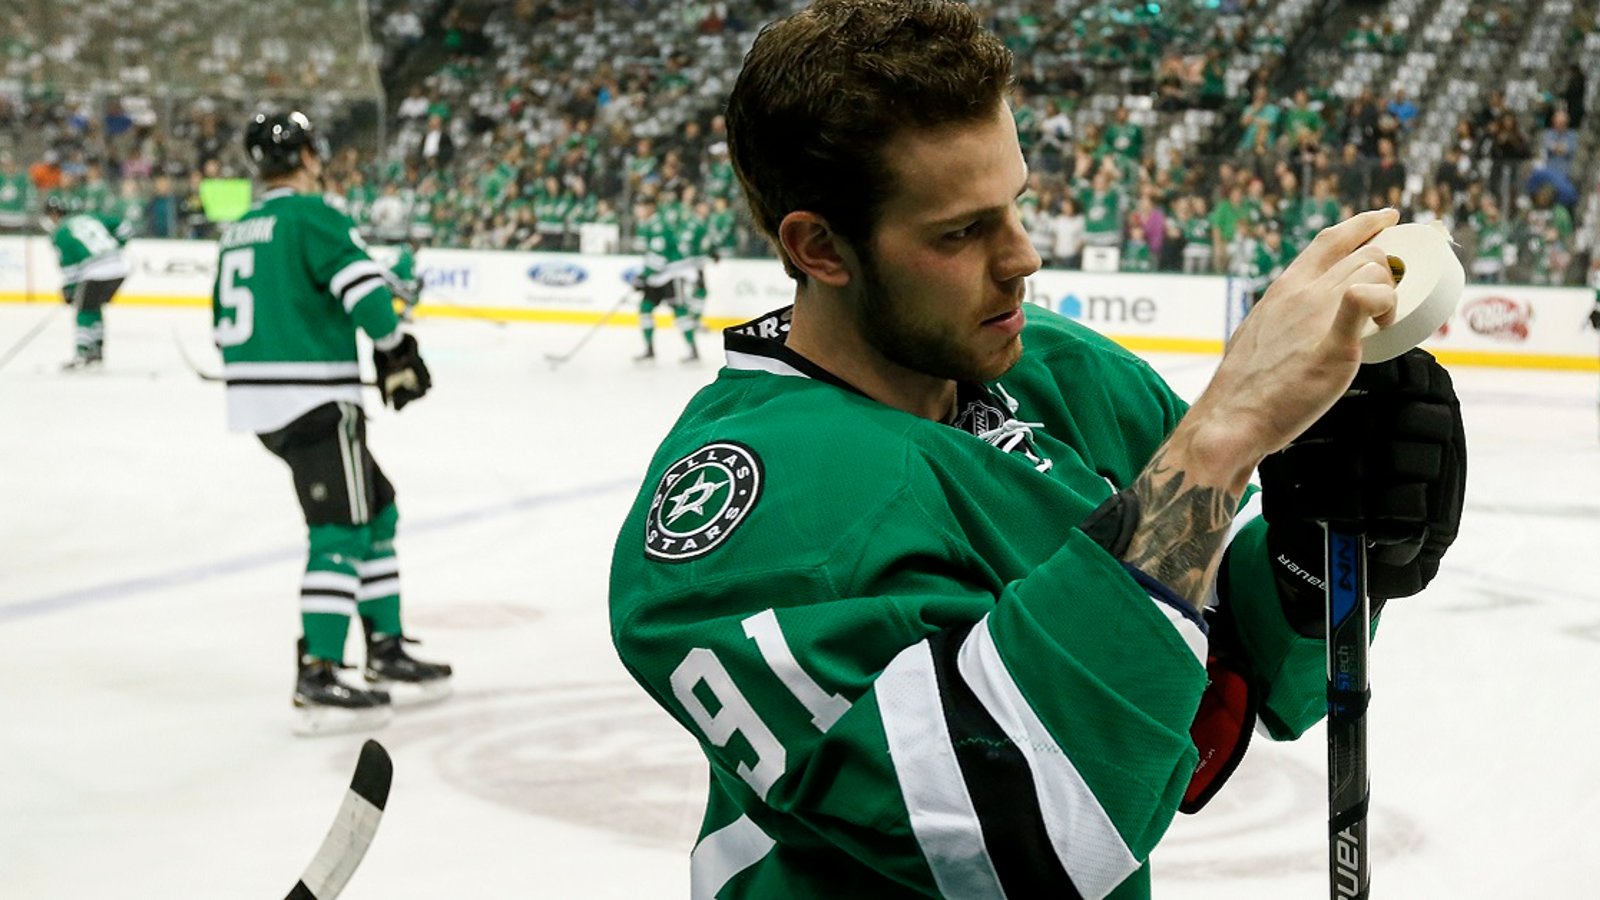 Tyler Seguin roasts the Habs out of nowhere during media interview.